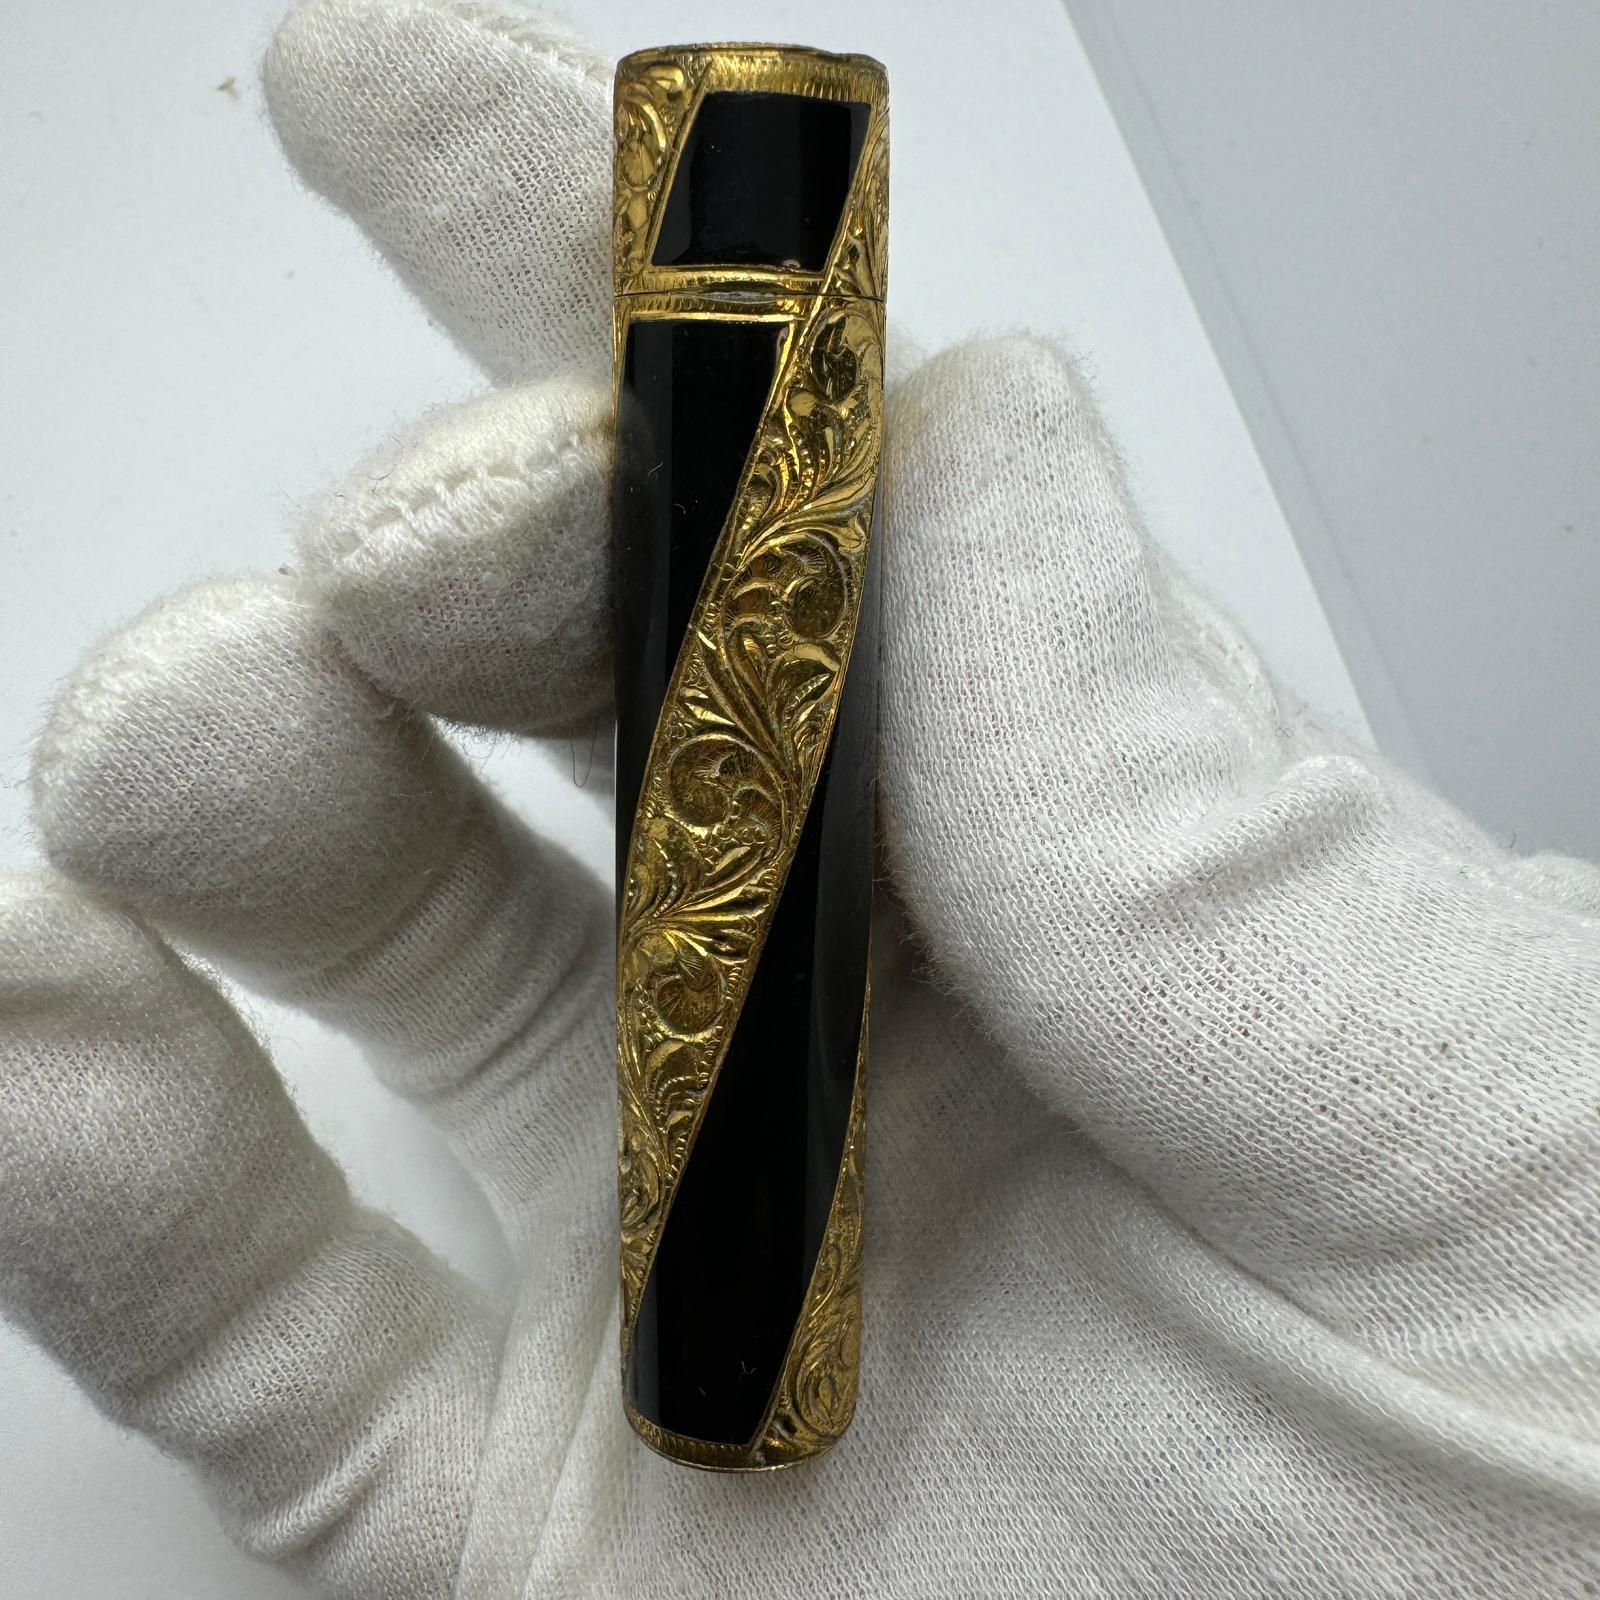 Rare Vintage Cartier circa 1980 18k Gold and Lacquer “Royking” Lighter For Sale 6